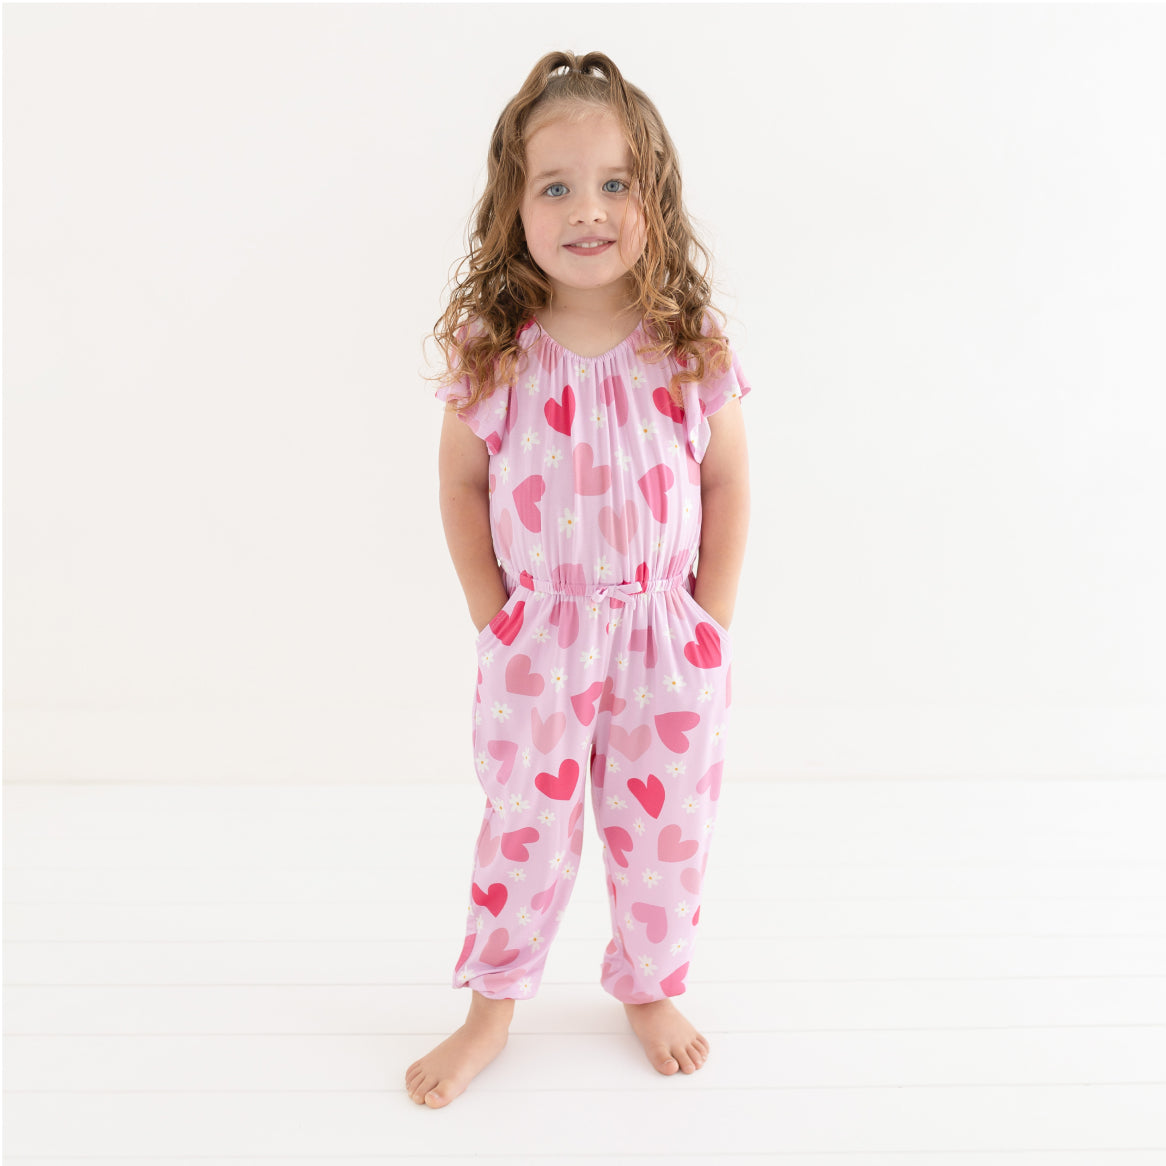 Bamboo Ruffle Layette Gown Set - Scarlet